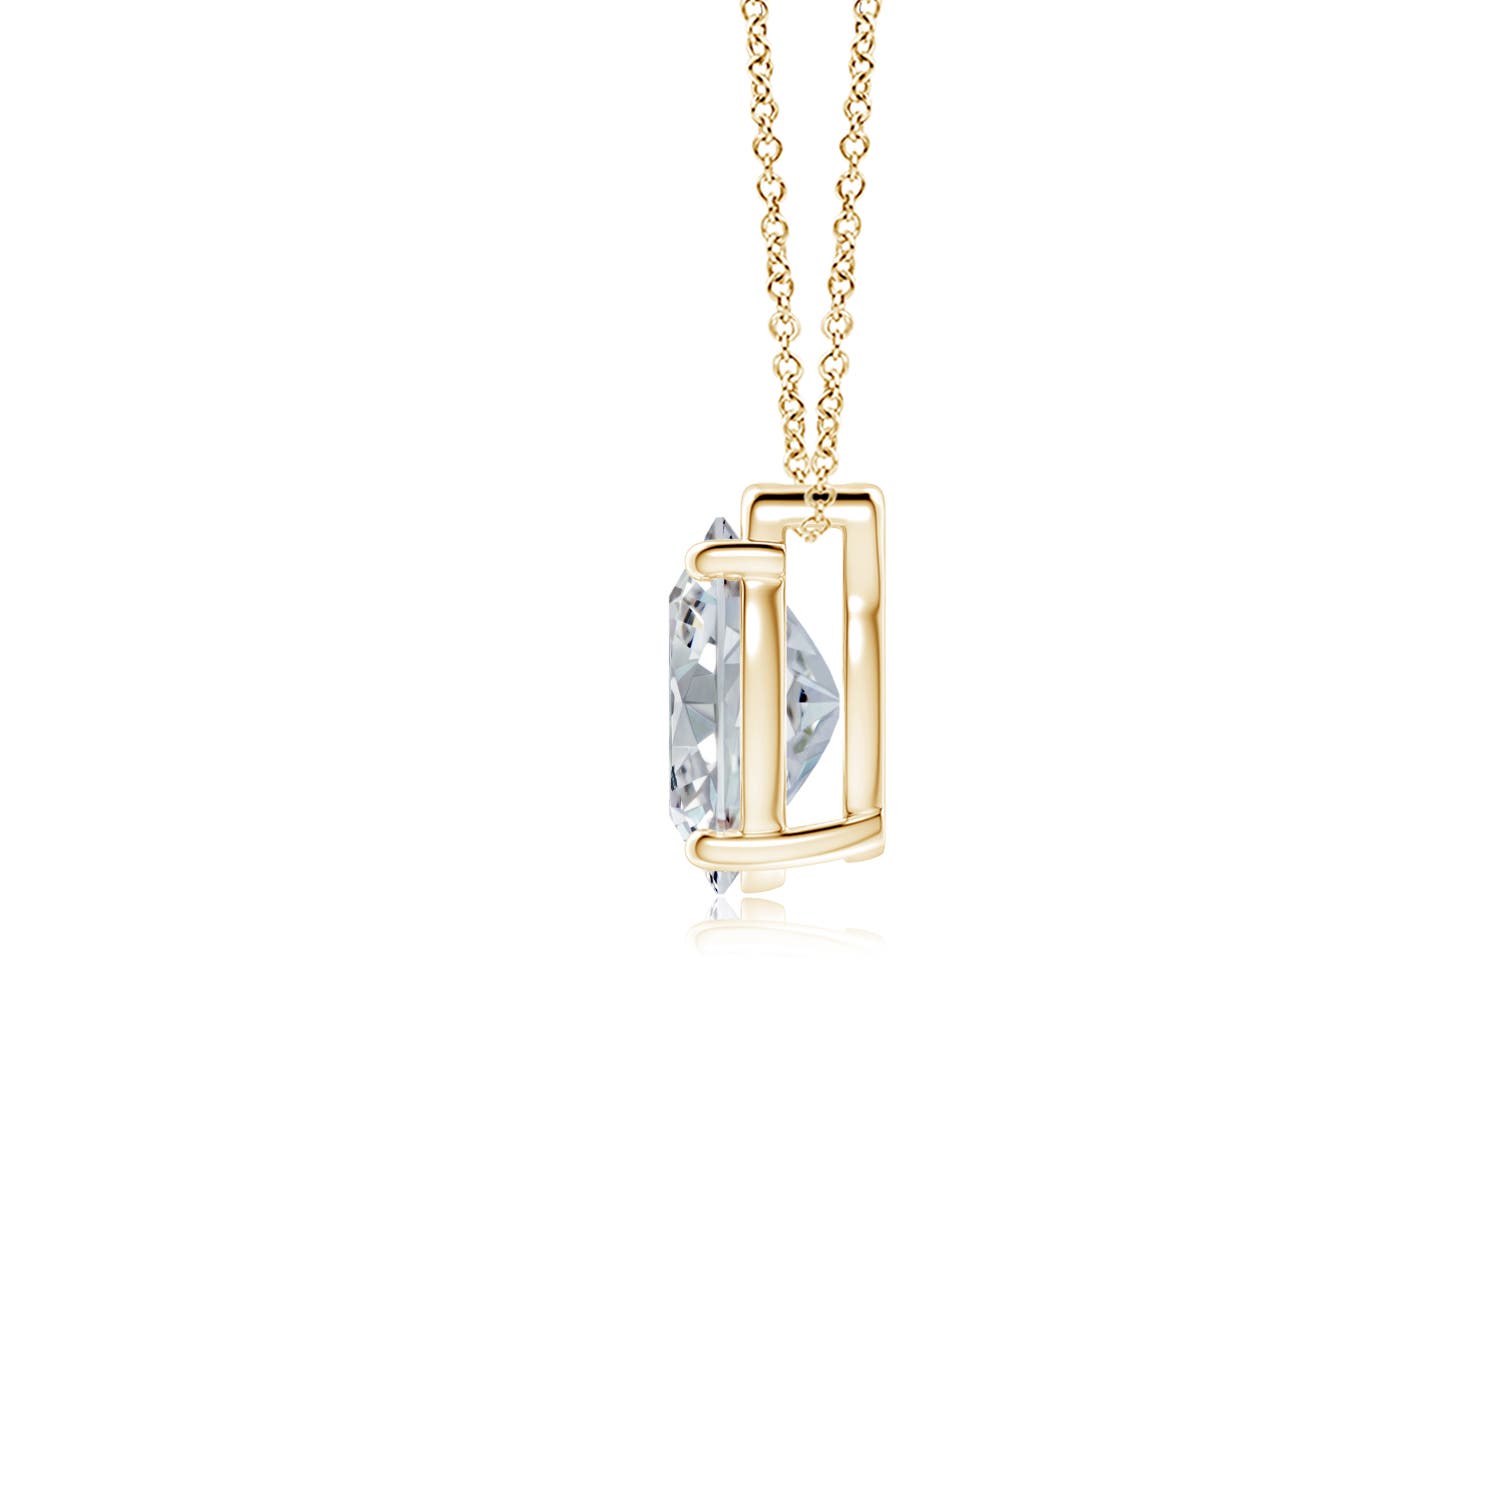 H, SI2 / 1 CT / 18 KT Yellow Gold